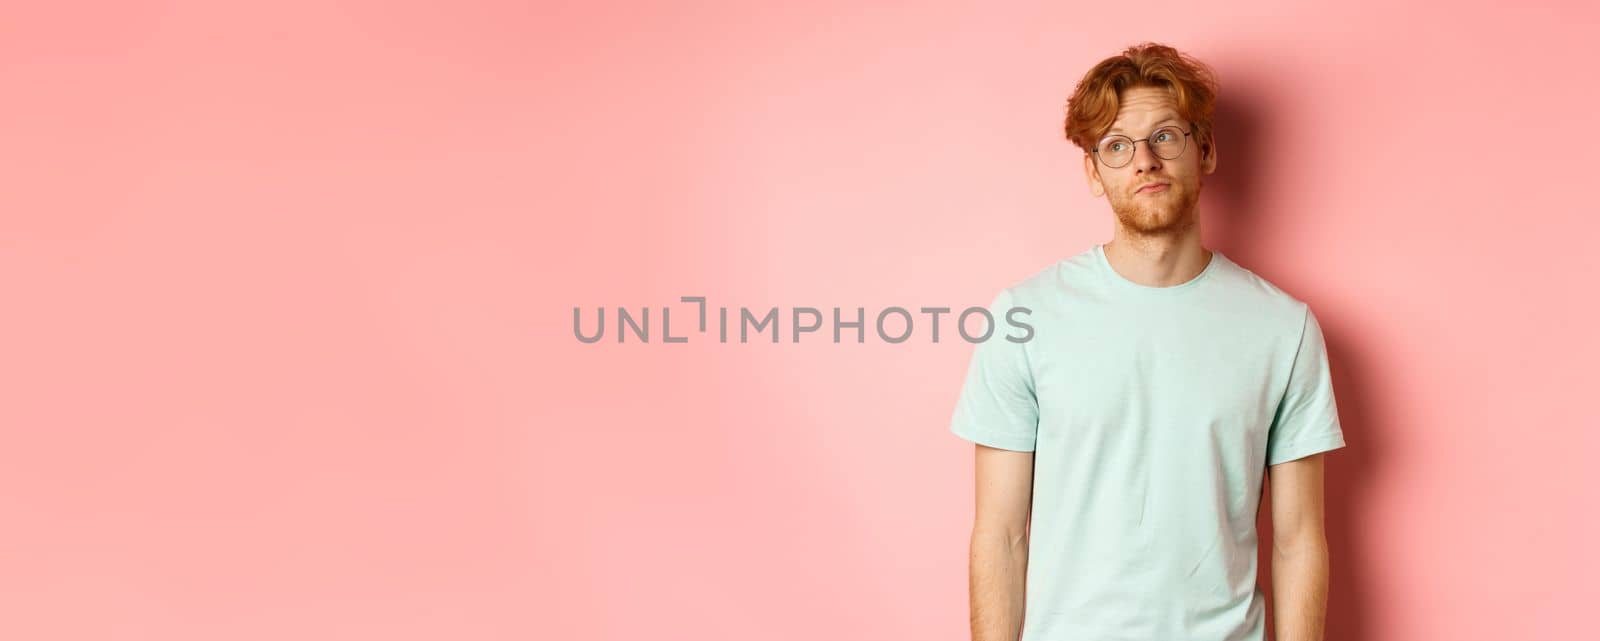 Image of young redhead man with beard, wearing t-shirt and glasses, looking left with bored unbothered face, standing over pink background.